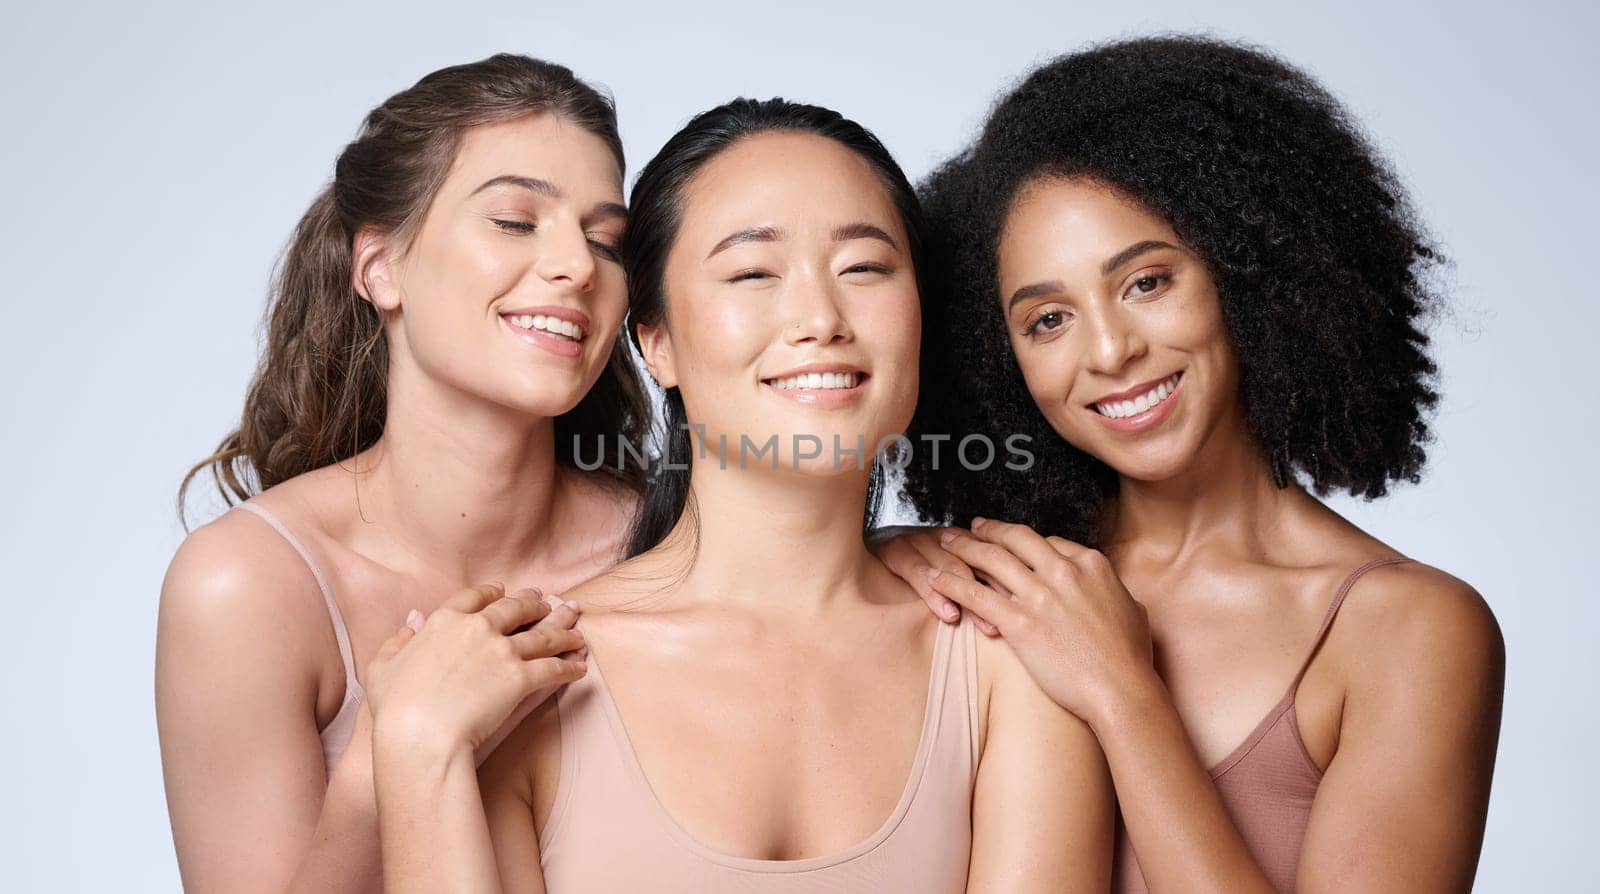 Women, faces diversity or skincare glow on studio background in healthcare wellness, self love empowerment or community support. Portrait, smile or happy beauty models or friends and makeup cosmetics.